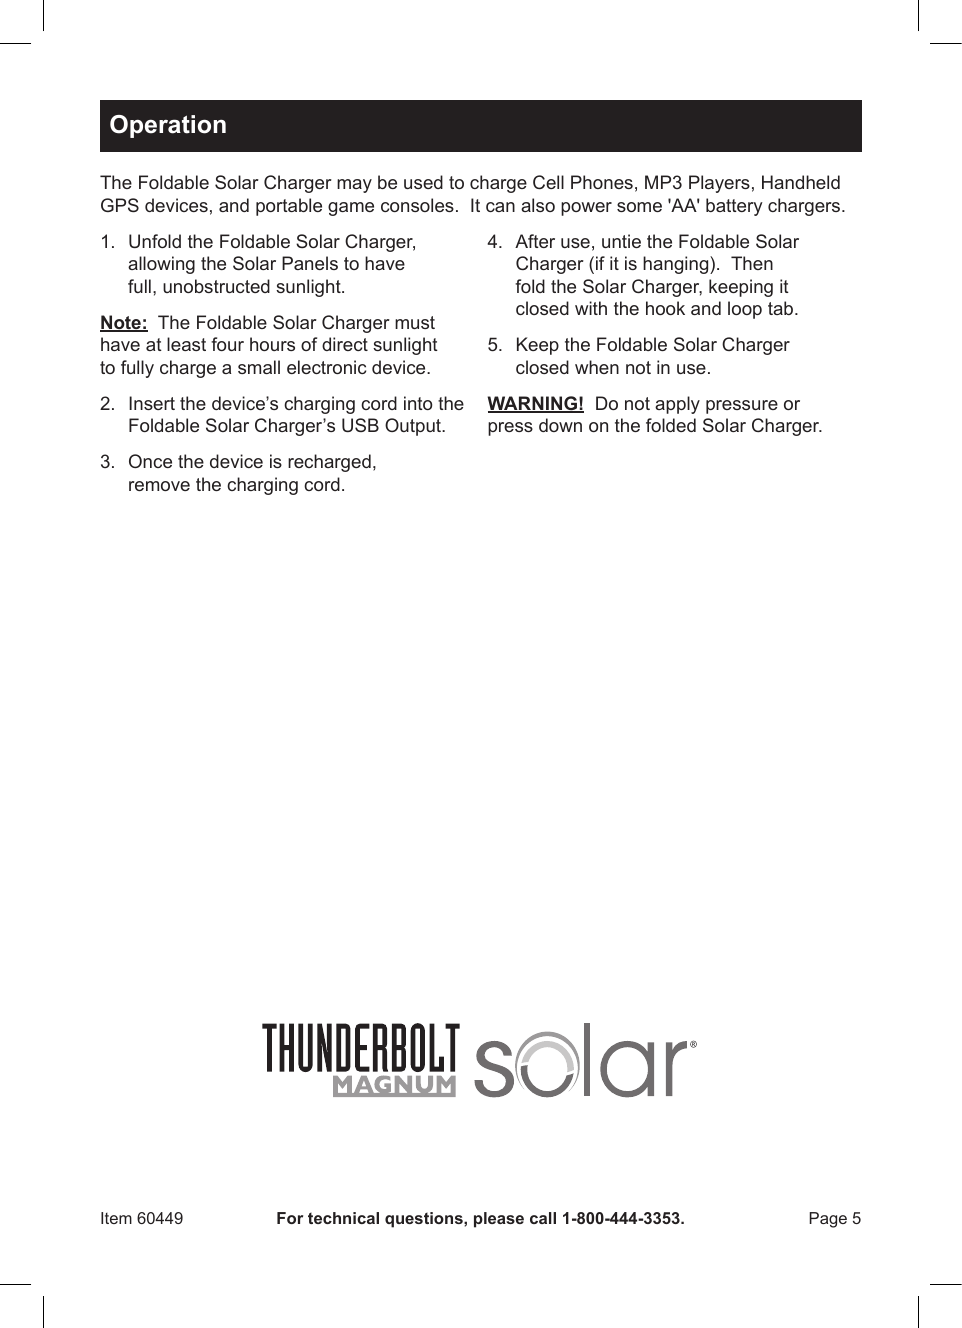 Page 5 of 8 - Harbor-Freight Harbor-Freight-5-Watt-Foldable-Solar-Panel-Charger-Product-Manual-  Harbor-freight-5-watt-foldable-solar-panel-charger-product-manual